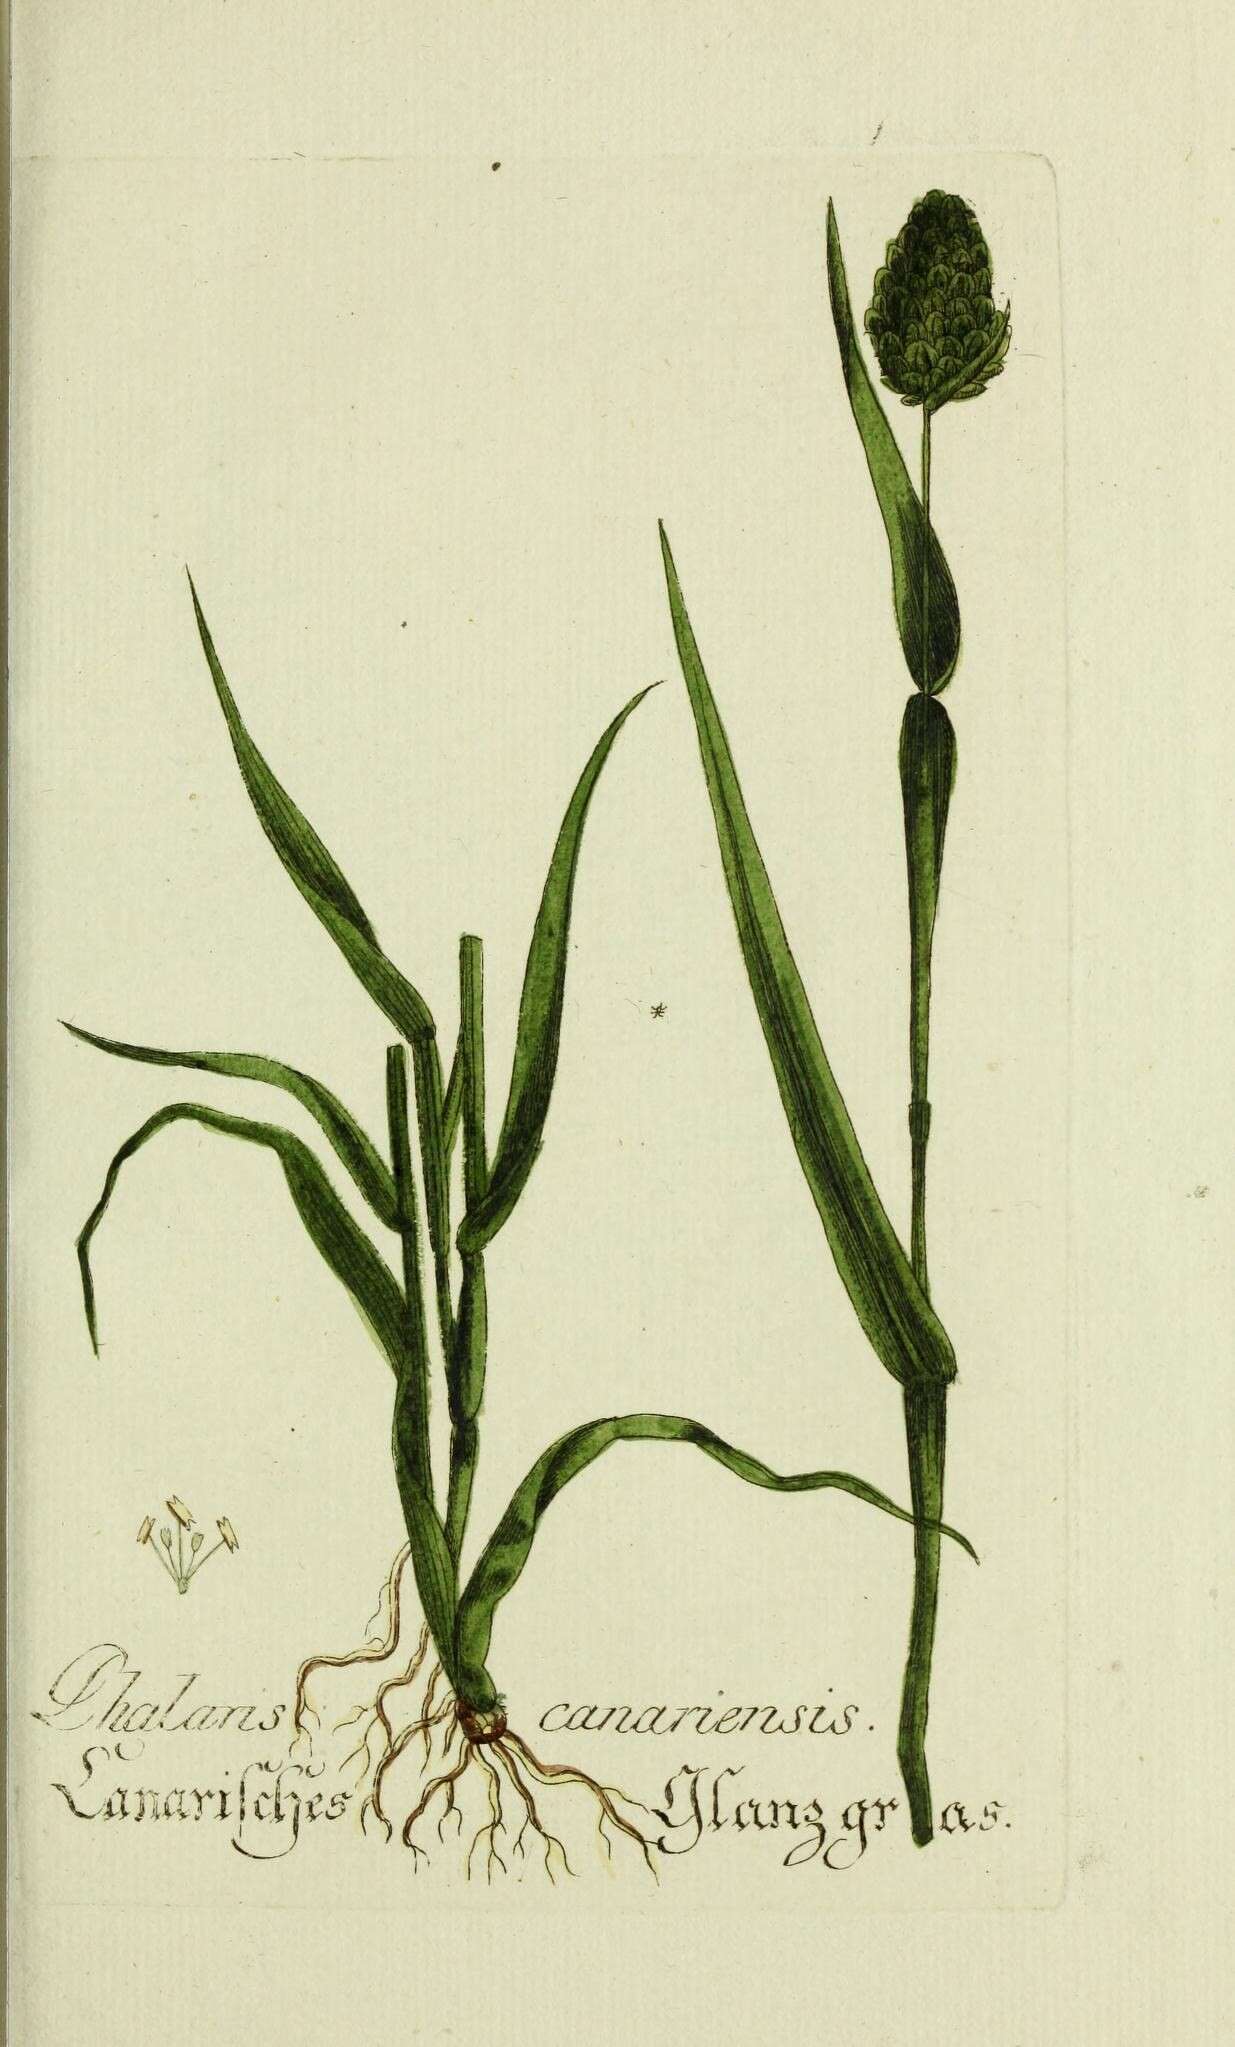 Image of annual canarygrass